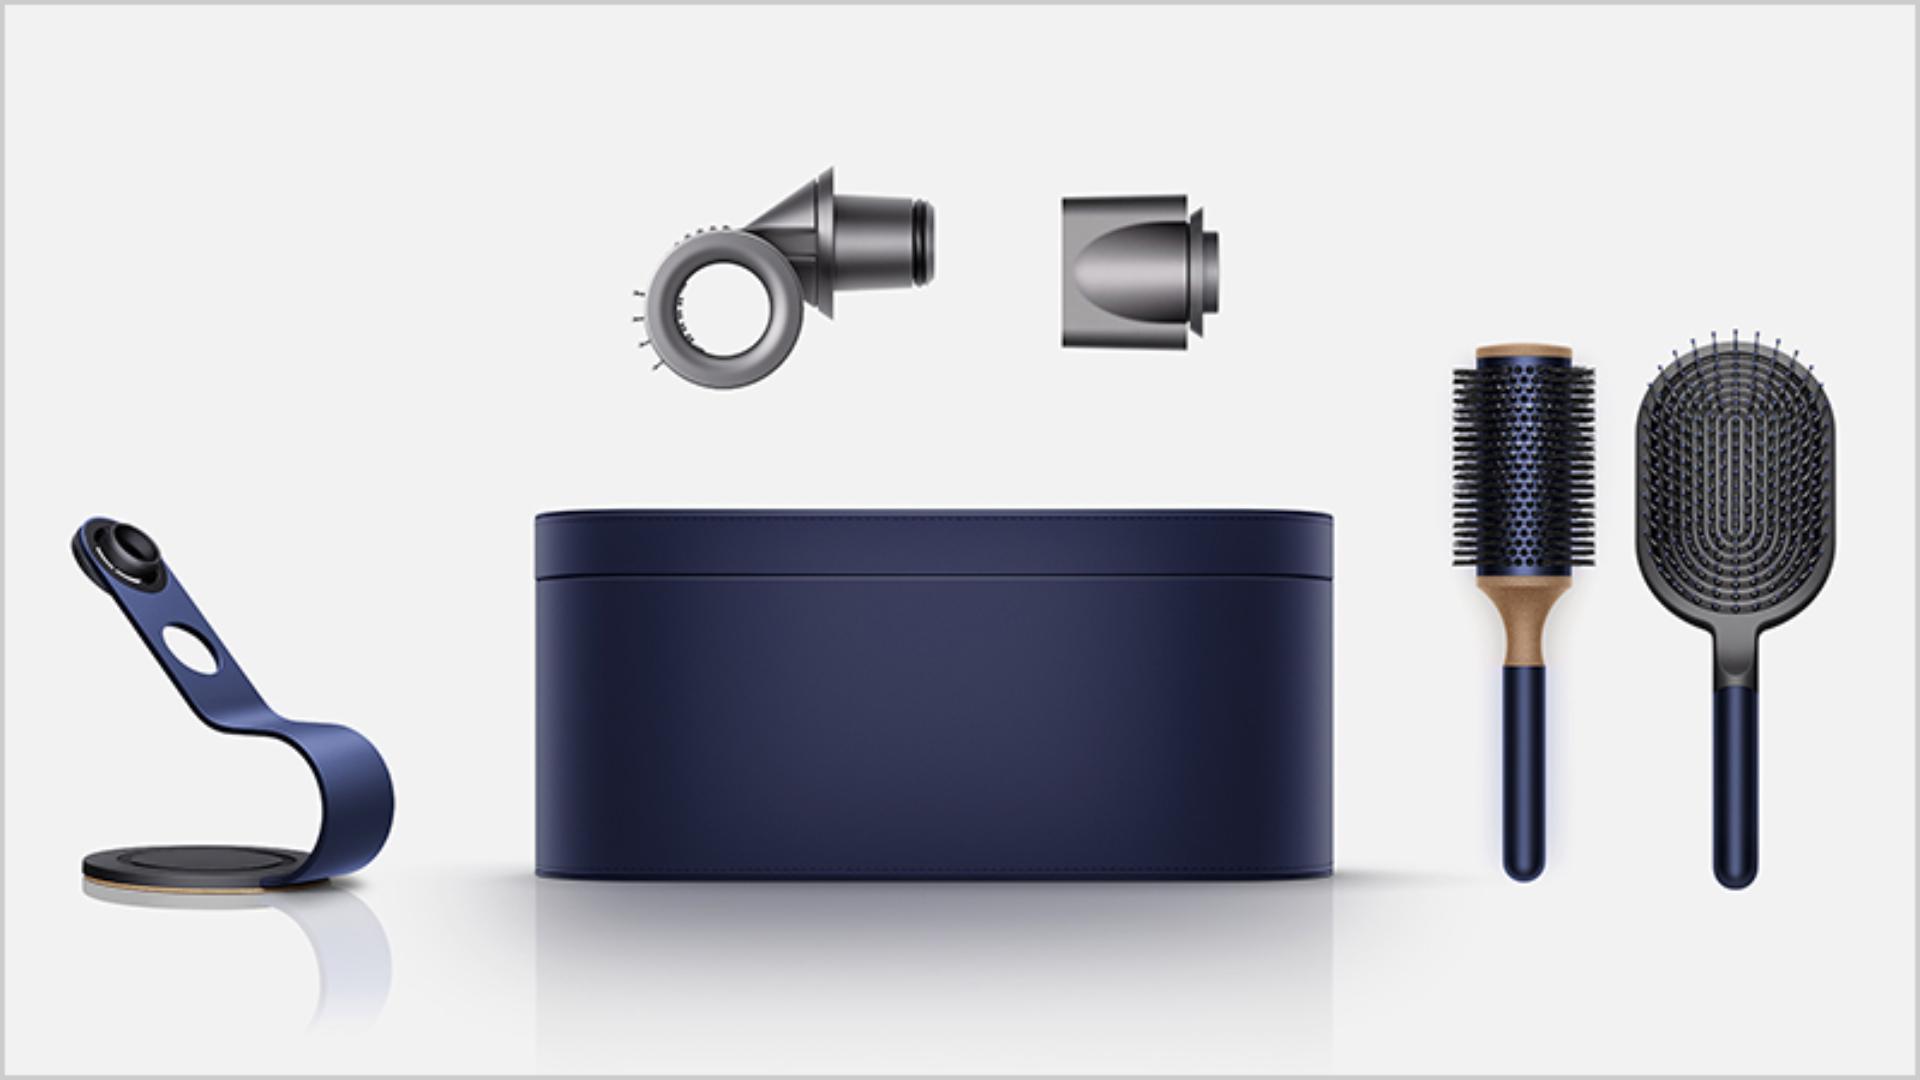 Image showing a selection of Dyson hair care tools